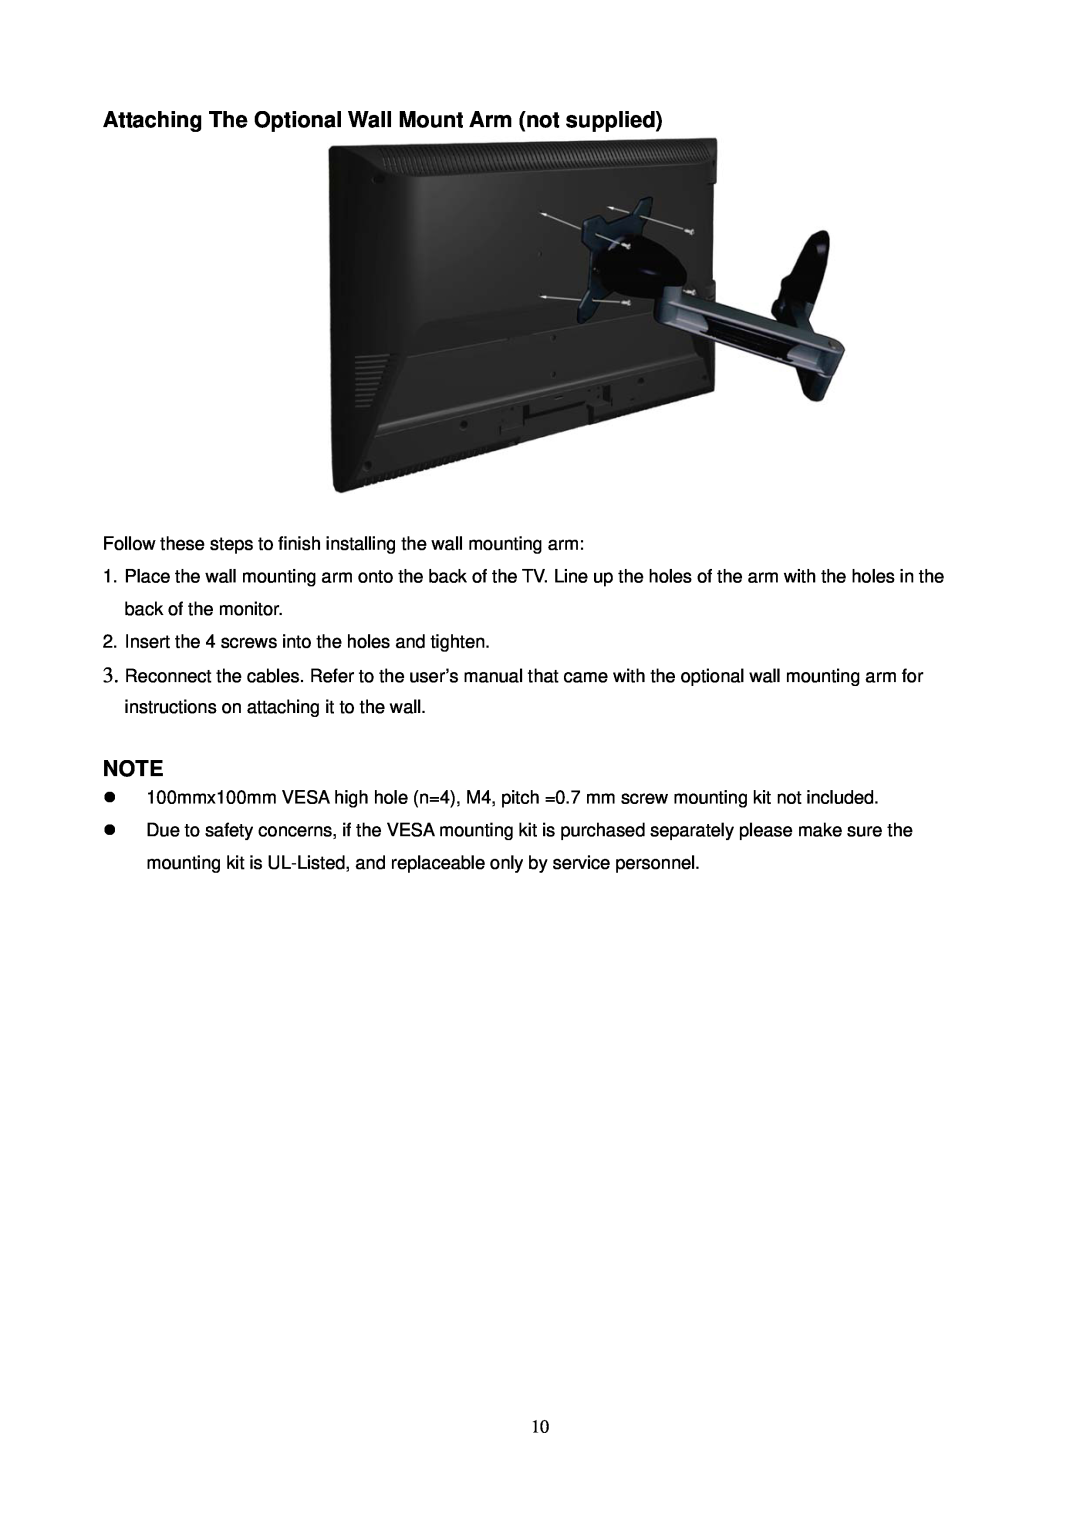 AOC L24H898 manual Attaching The Optional Wall Mount Arm not supplied 